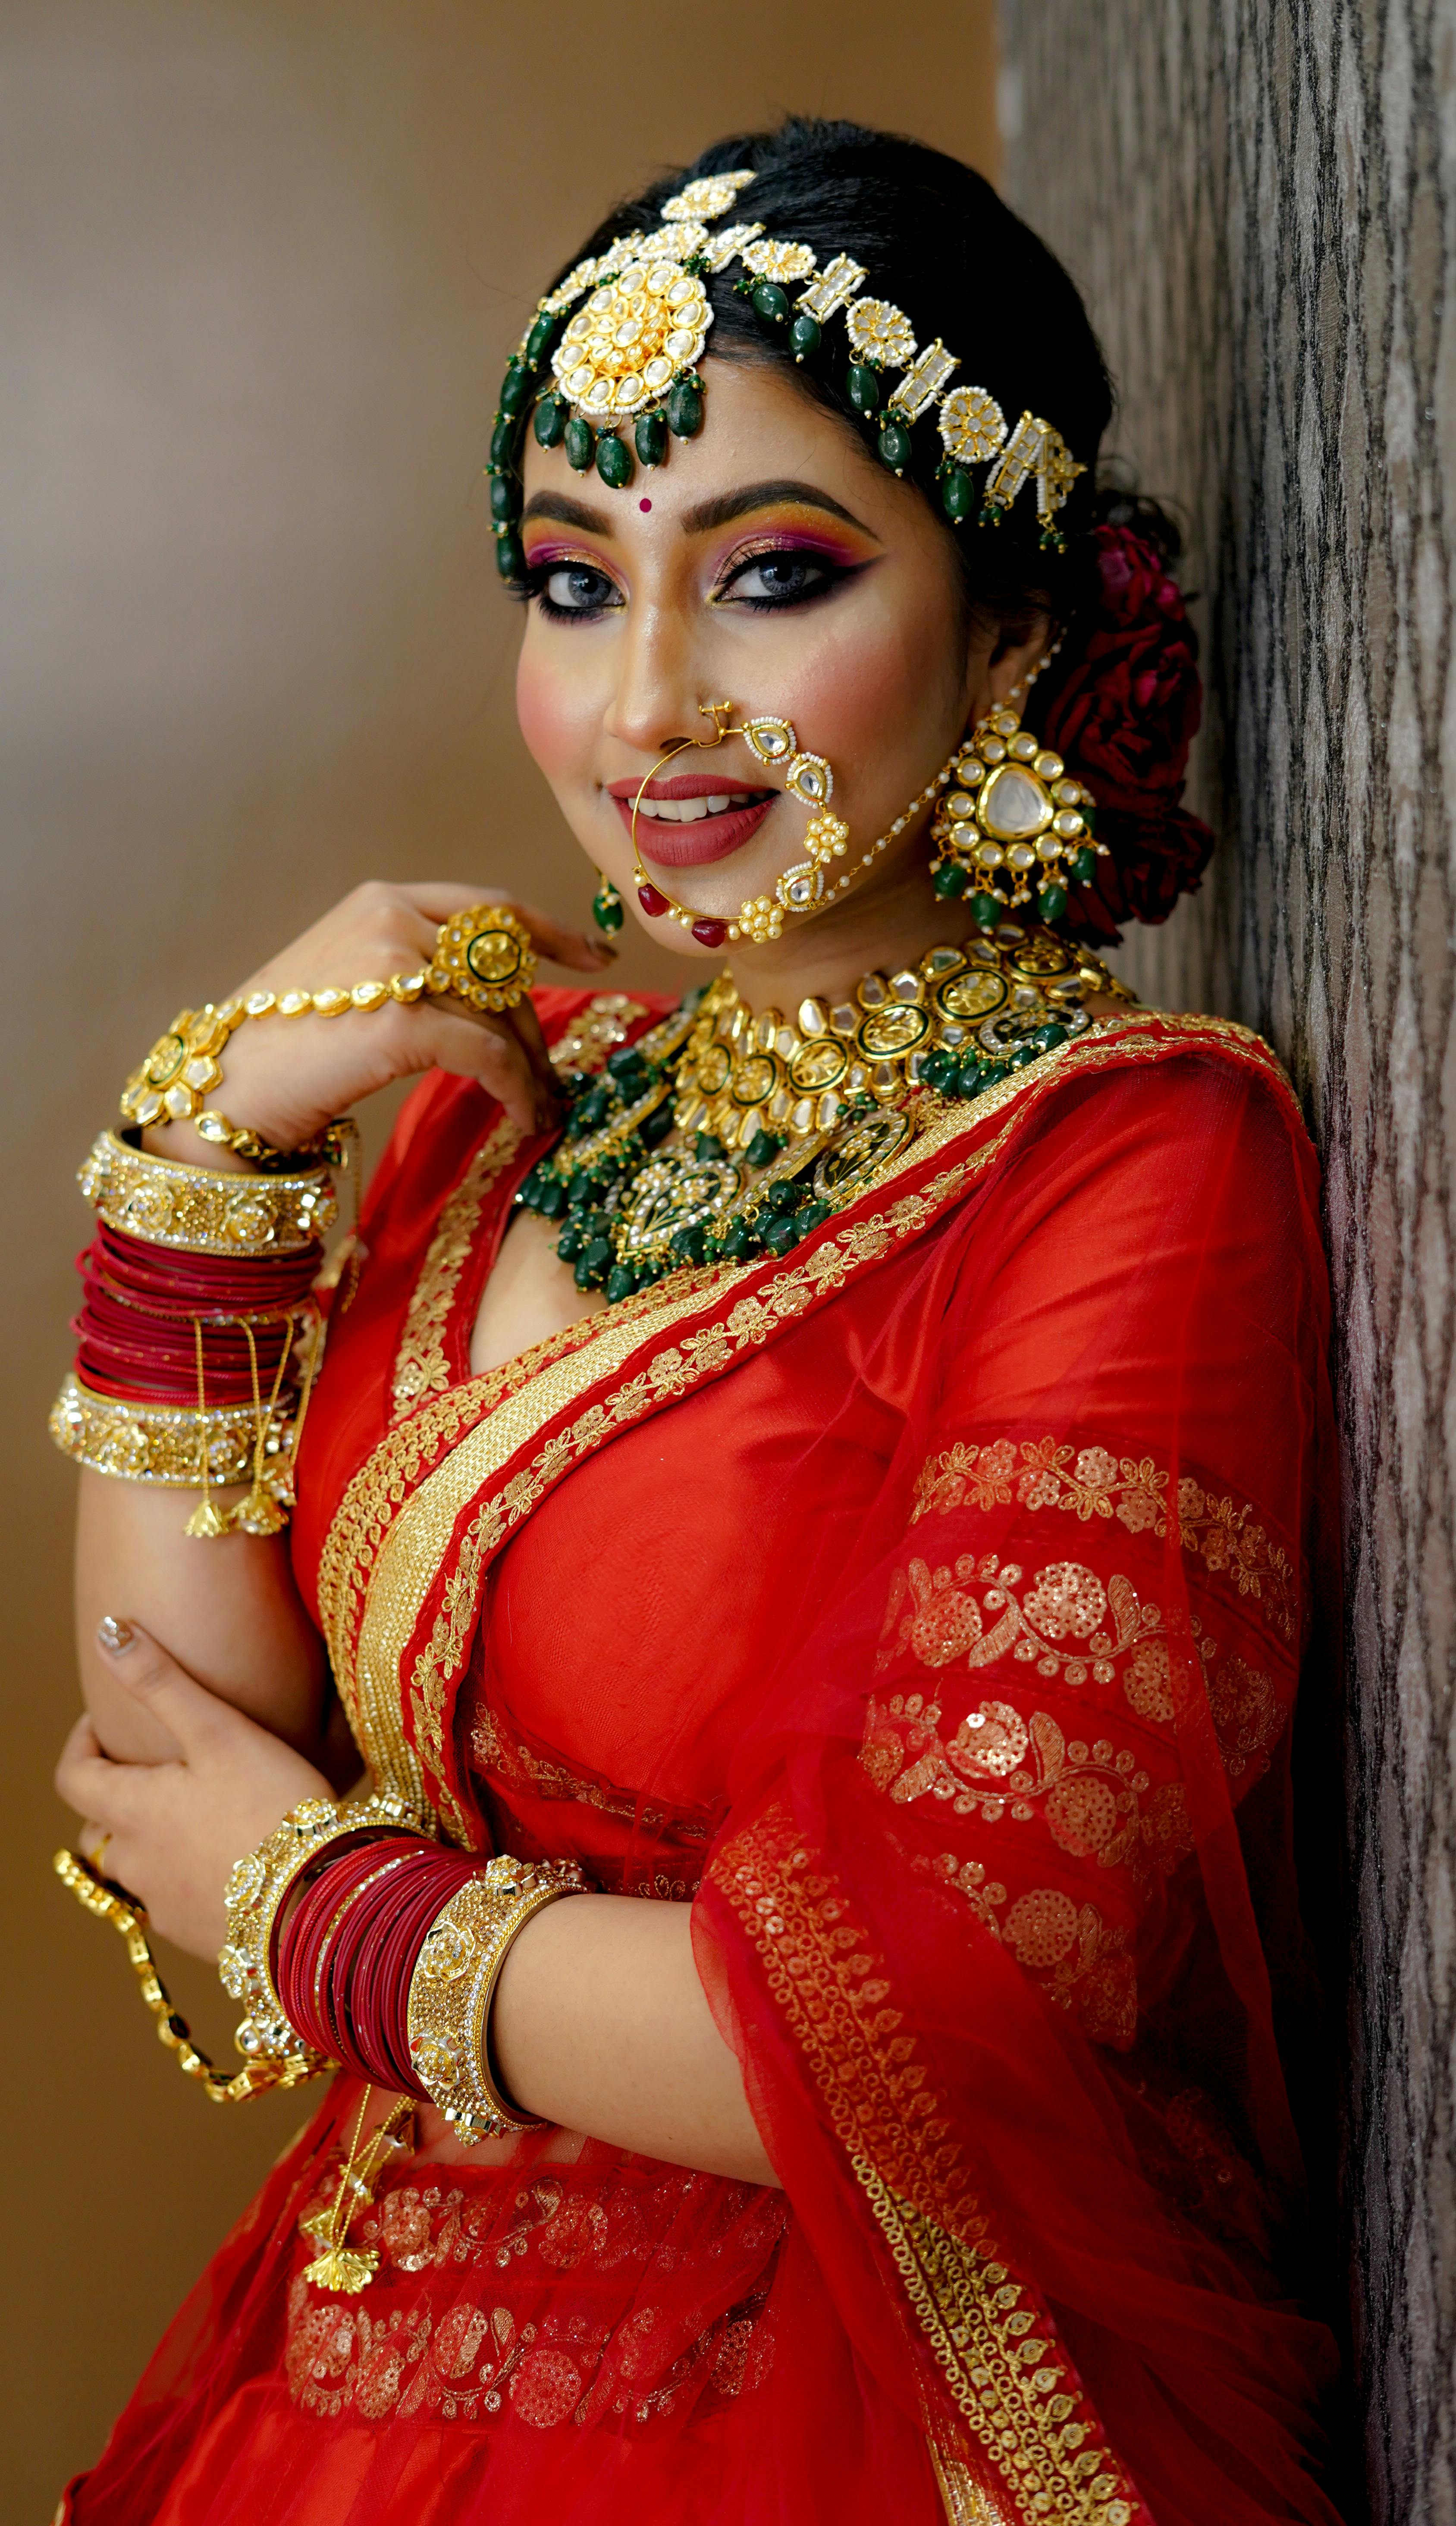 Indian Bride With Glam Makeup, Haldi Turmeric on Her Face for Traditional  Ceremony